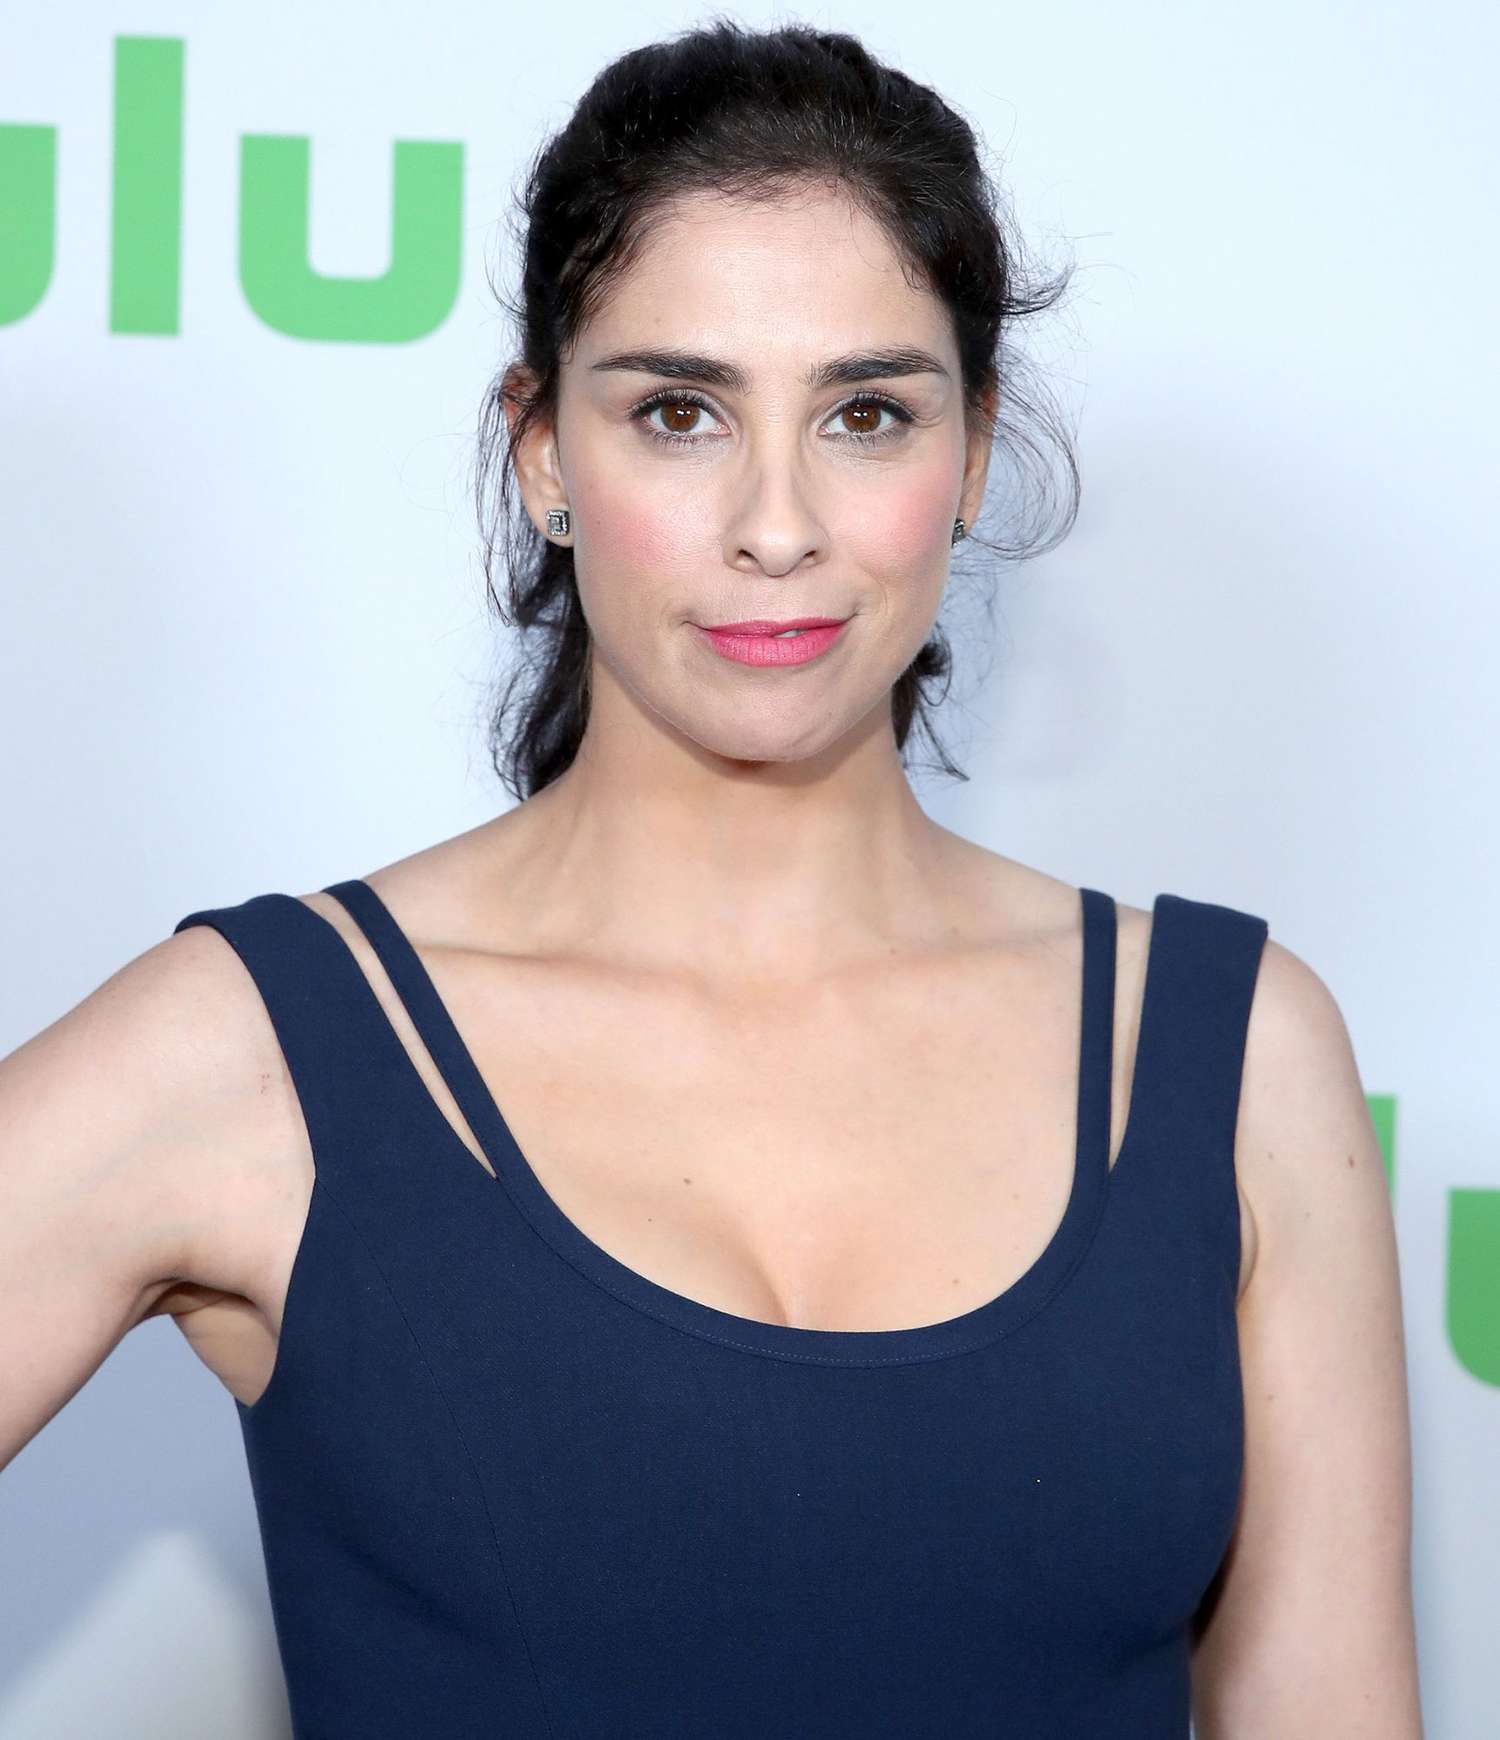 Sarah Silverman Started Dating New Boyfriend Through Call Of Duty People Com Know her dating life, boyfriend, married, husband, family, including her wiki, biography, net worth, salary, birthday, age, height sarah silverman, an american standup comedian, writer, and actress, is known for addressing controversial topics like religion, politics, racism, sexism. sarah silverman started dating new